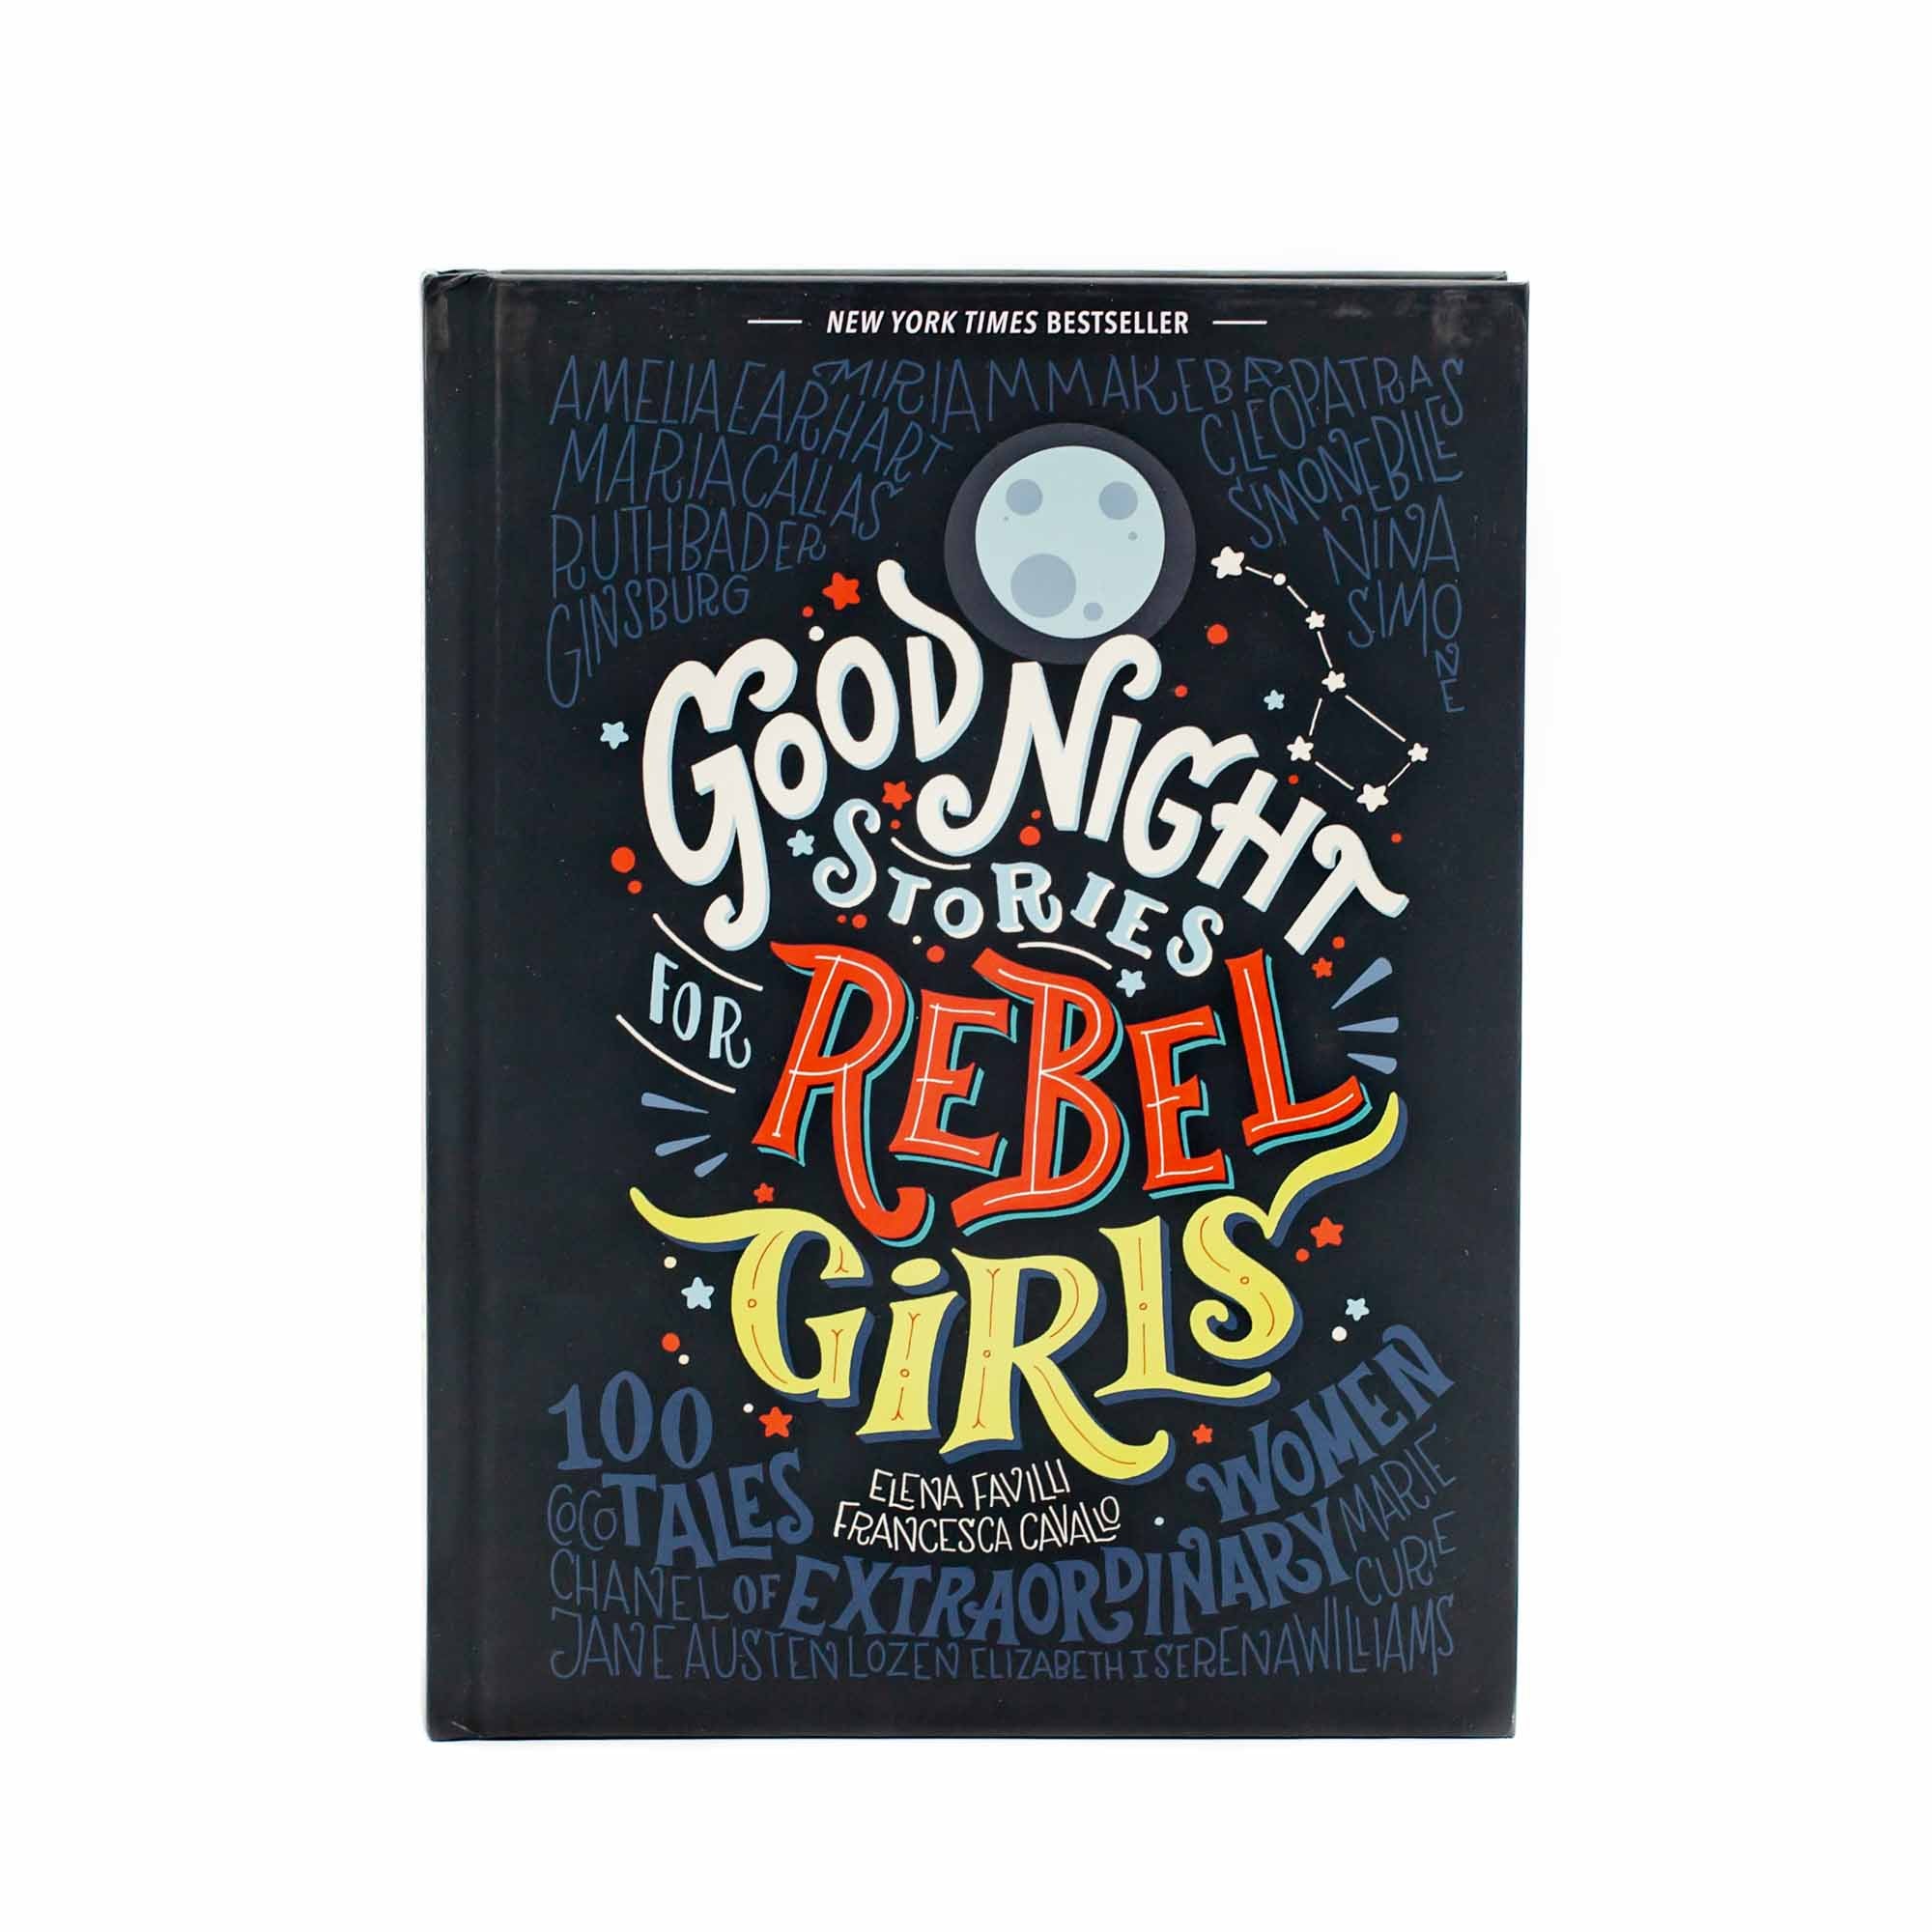 Goodnight Stories for Rebel Girls - Mortise And Tenon